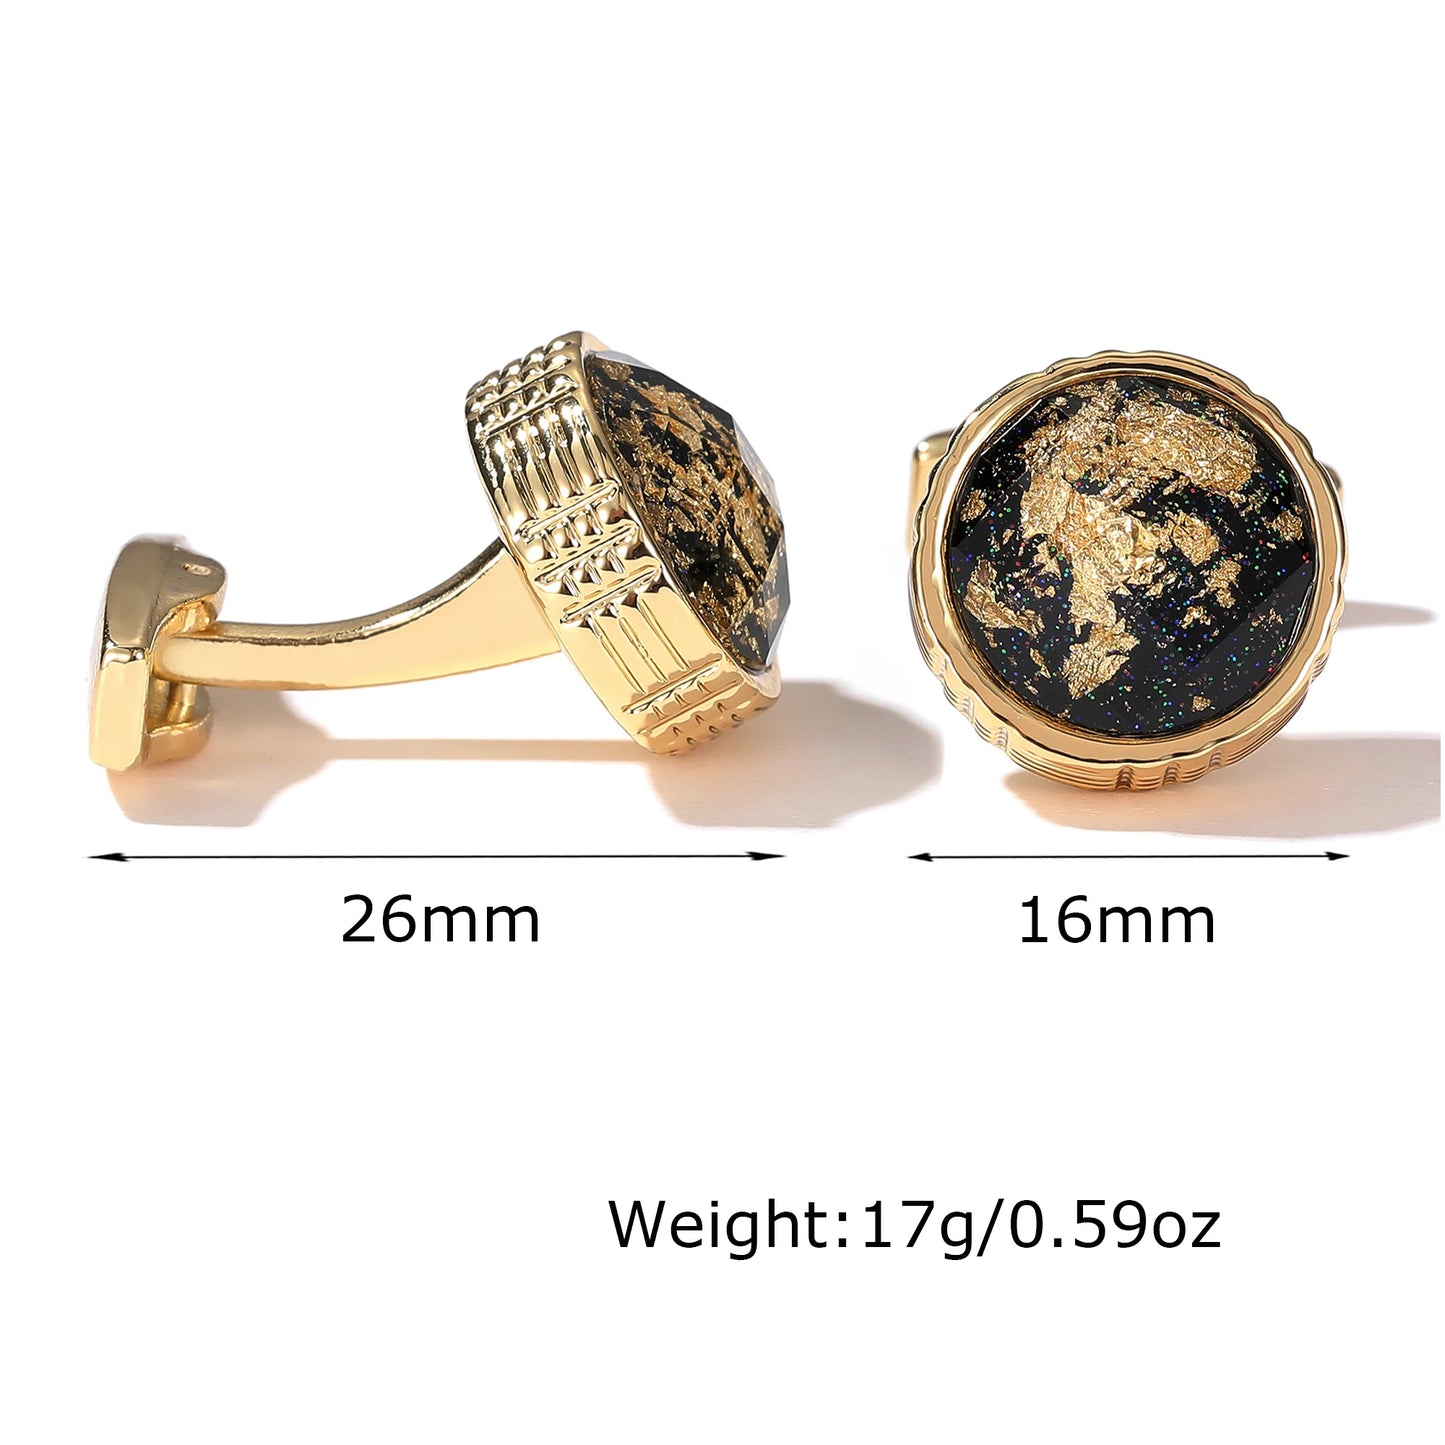 Cufflinks Gold Color Personalized Round Tuxedo Formal Shirt Cuff Links Button for Men Wedding Gifts Jewelry